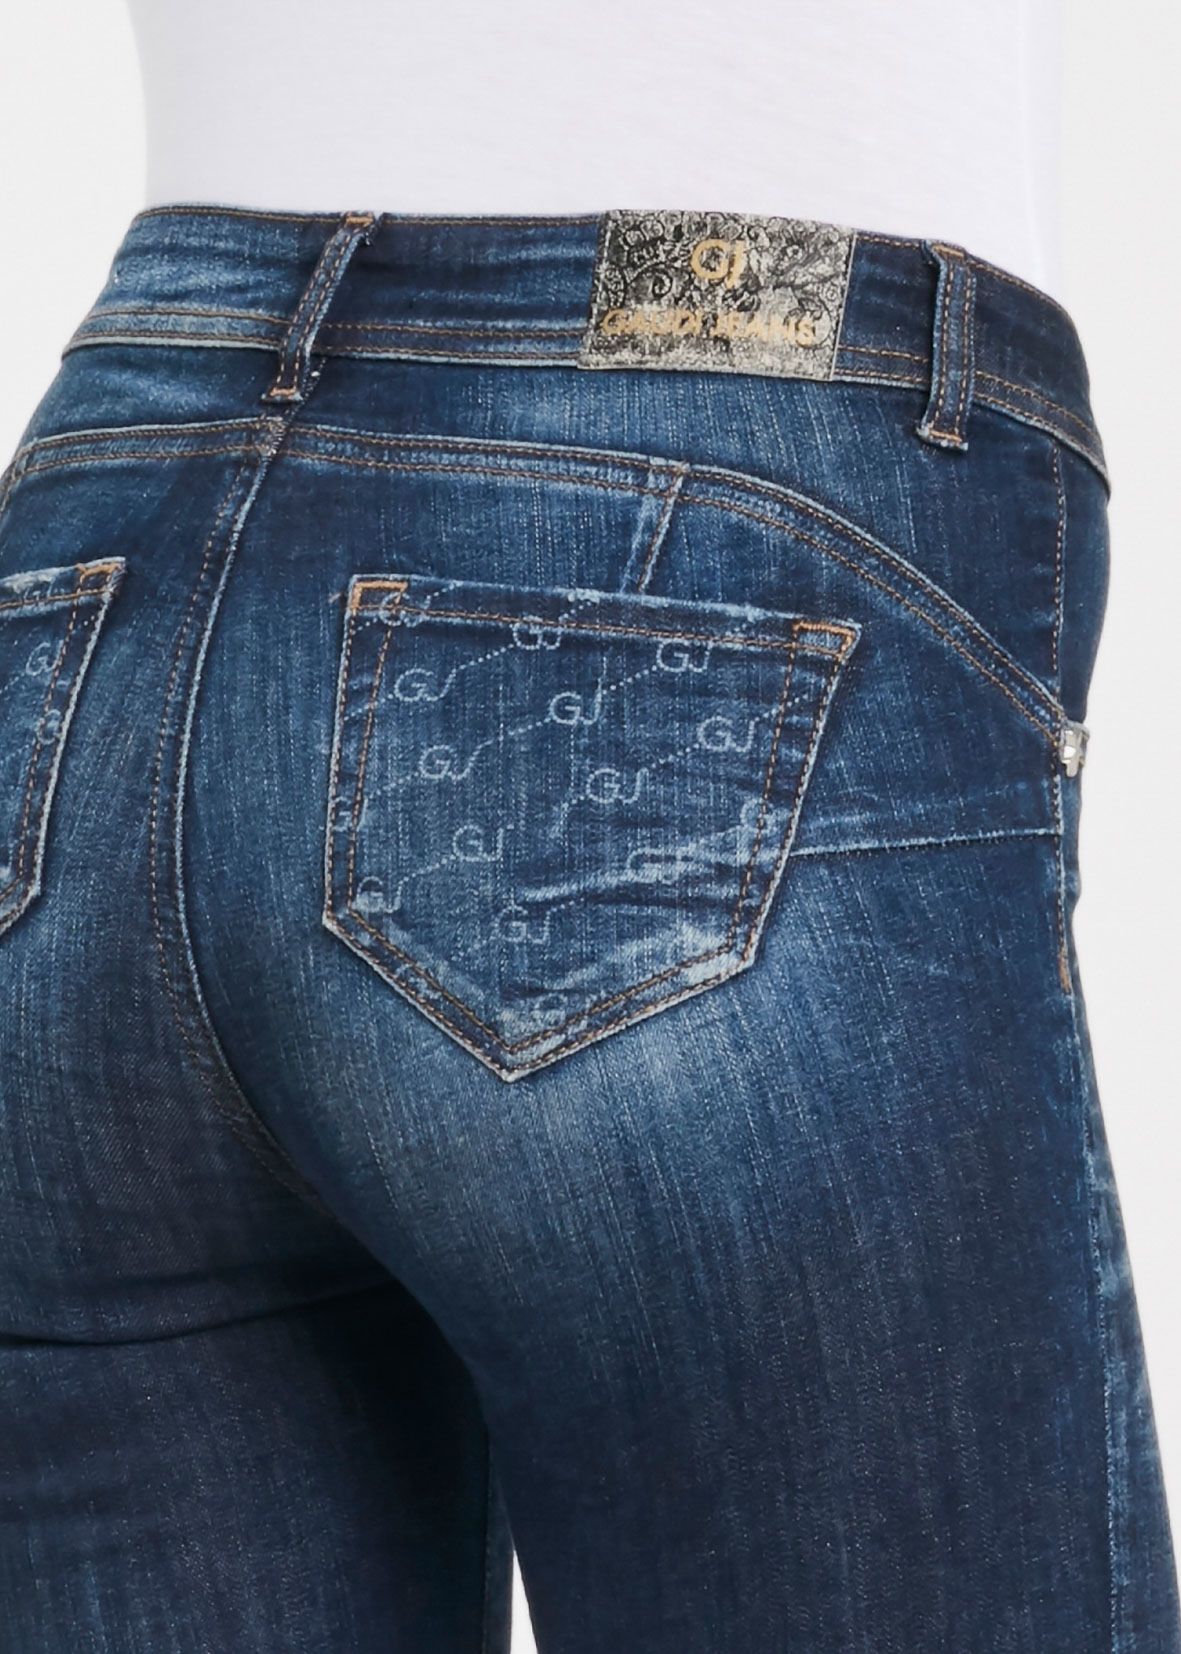 Jeans with logo pockets